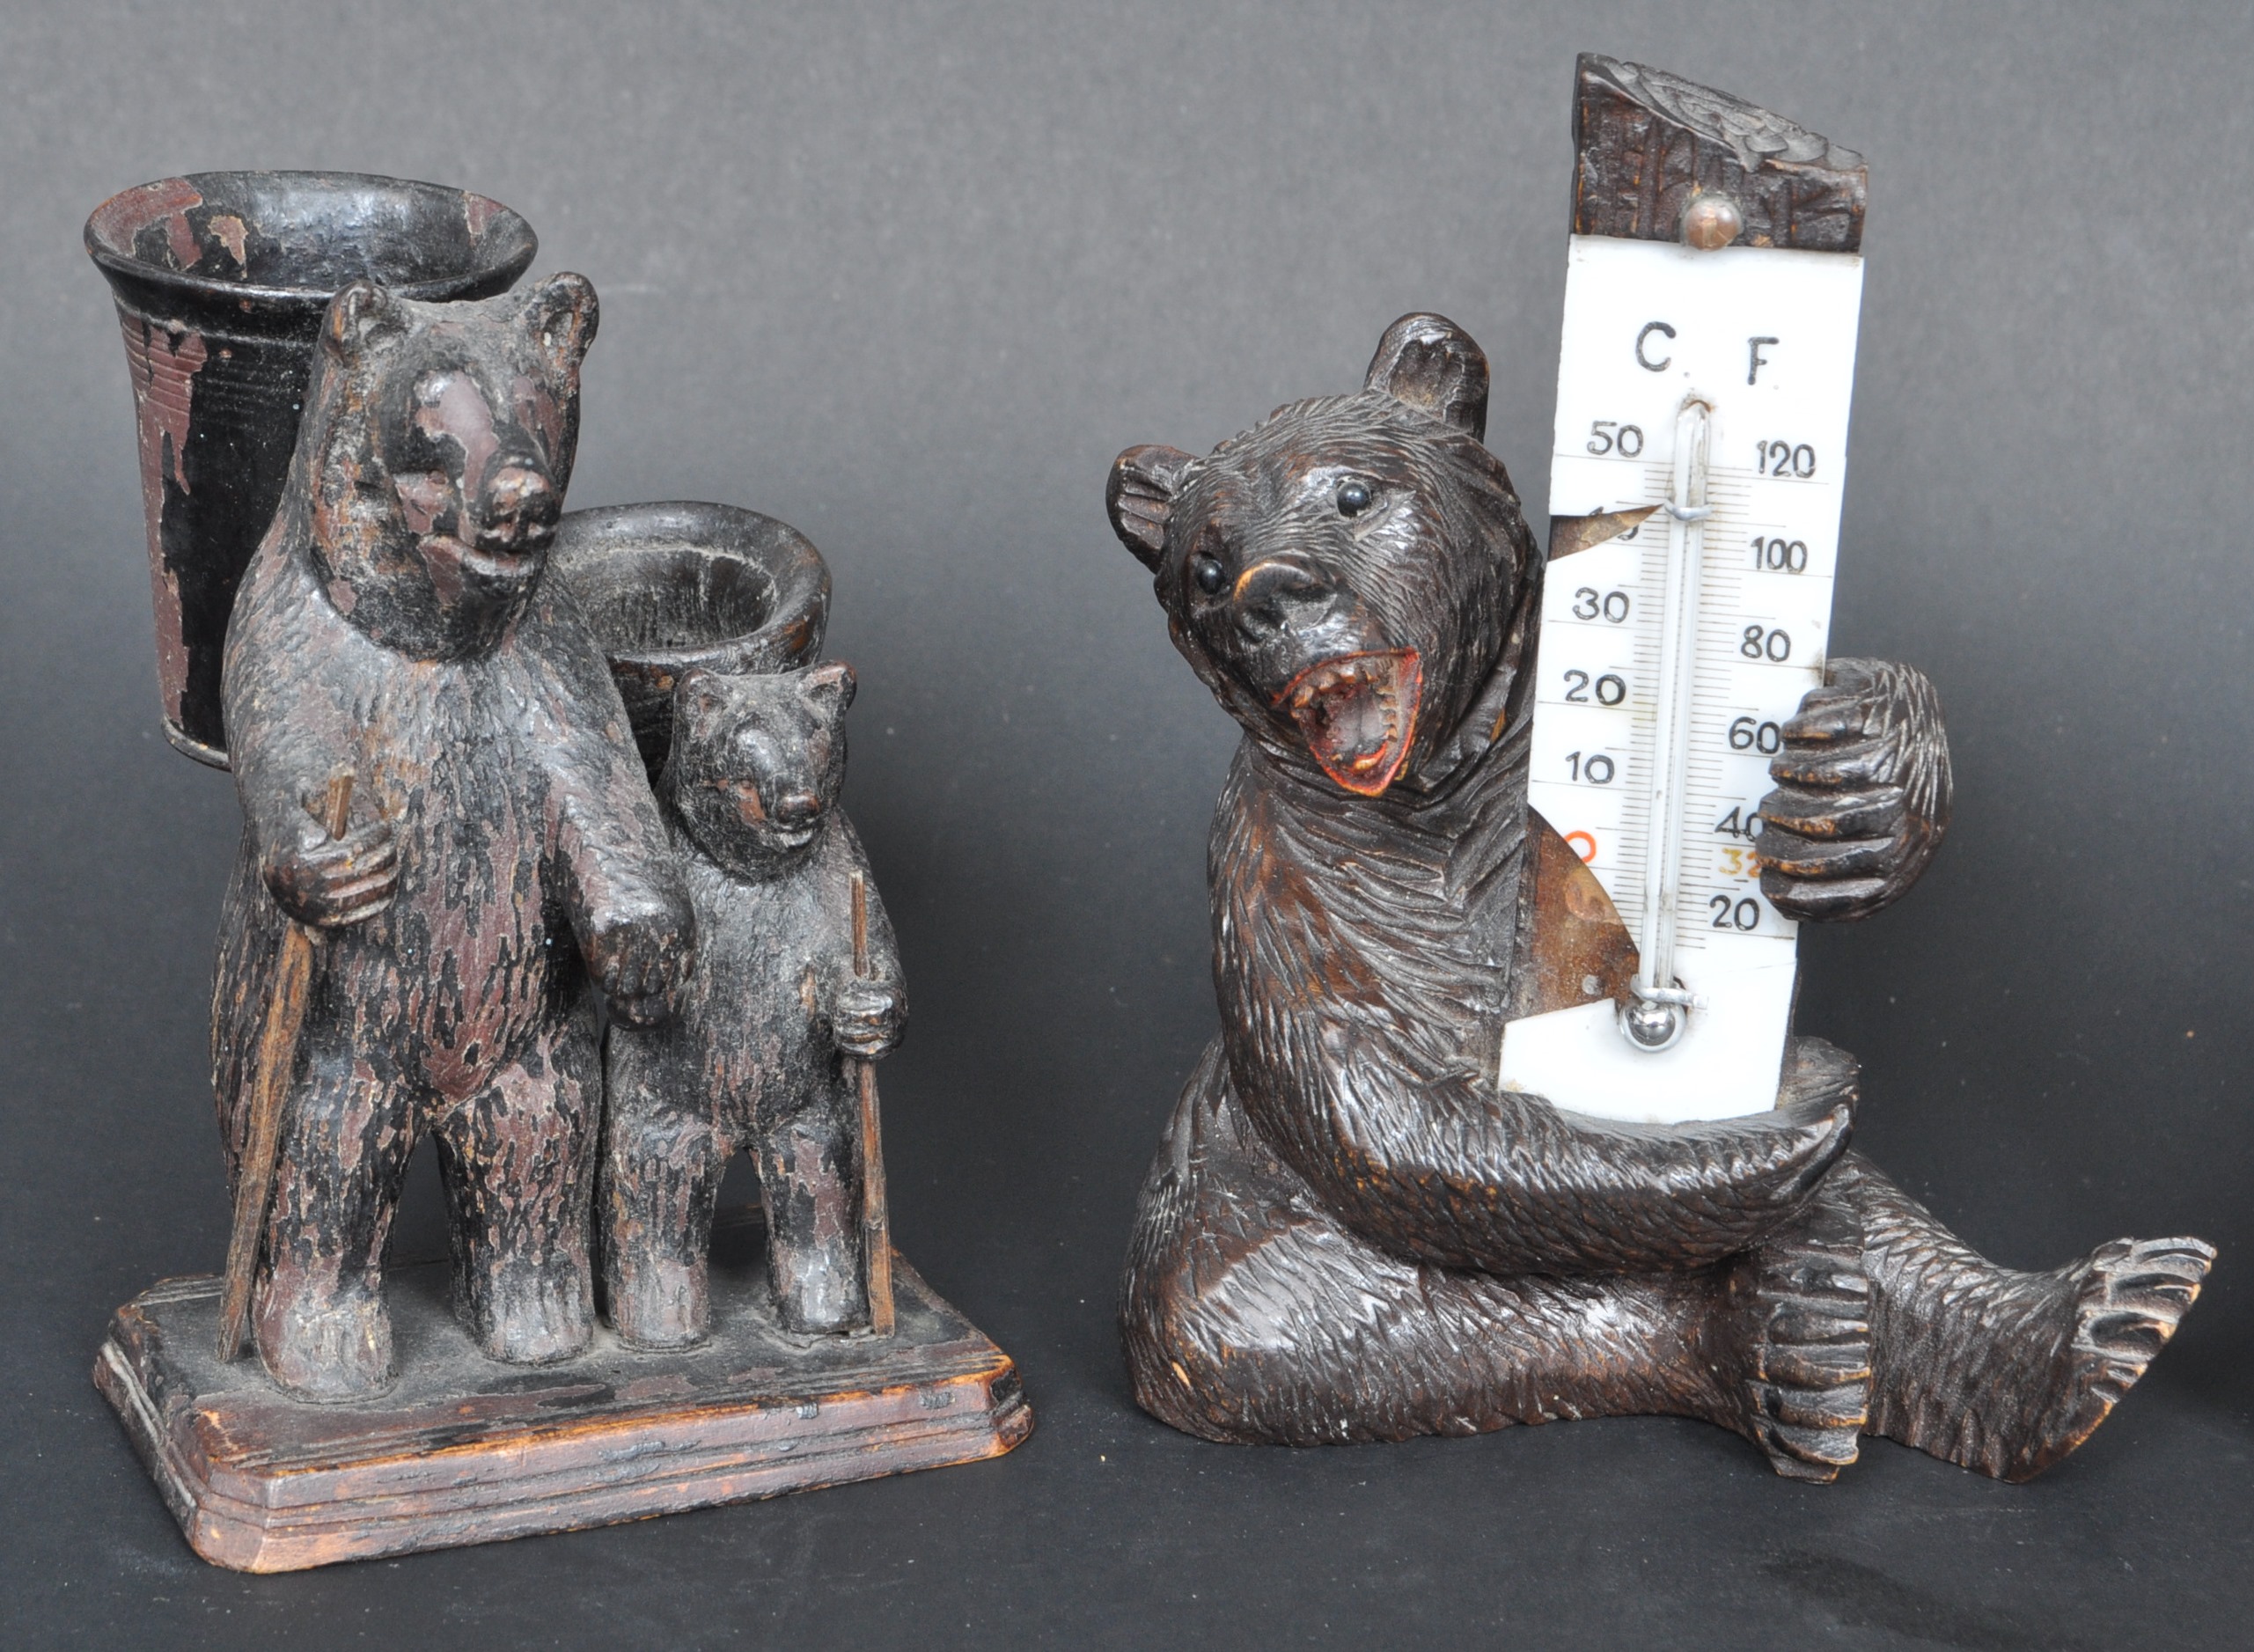 COLLECTION OF FOUR 19TH CENTURY GERMAN BLACK FOREST BEARS - Image 2 of 7